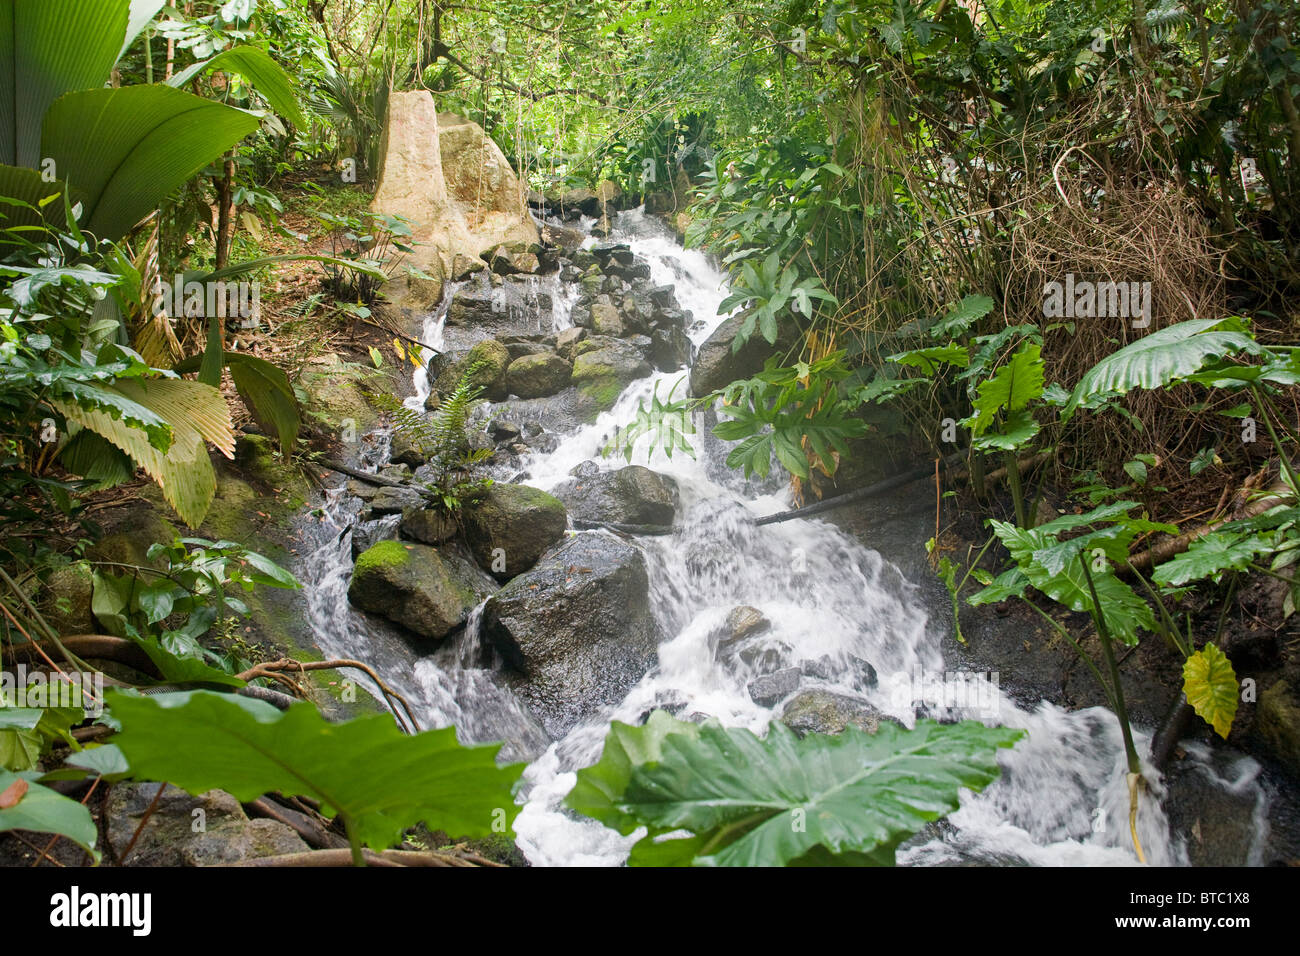 Waterfall Eden Project The worlds largest Greenhouse United Kingdom Stock Photo